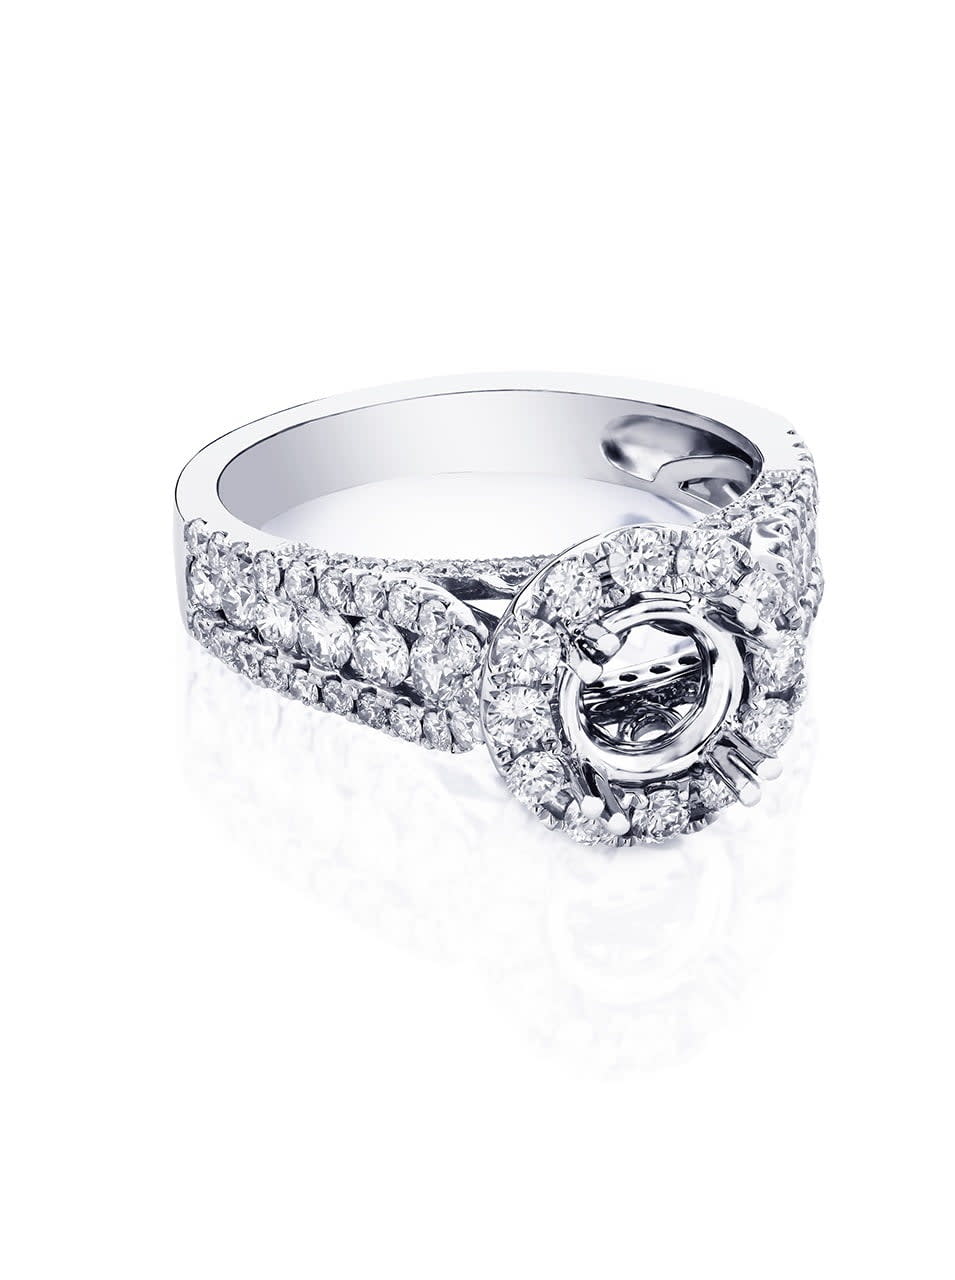 jewelry retouching service ring photo editing after